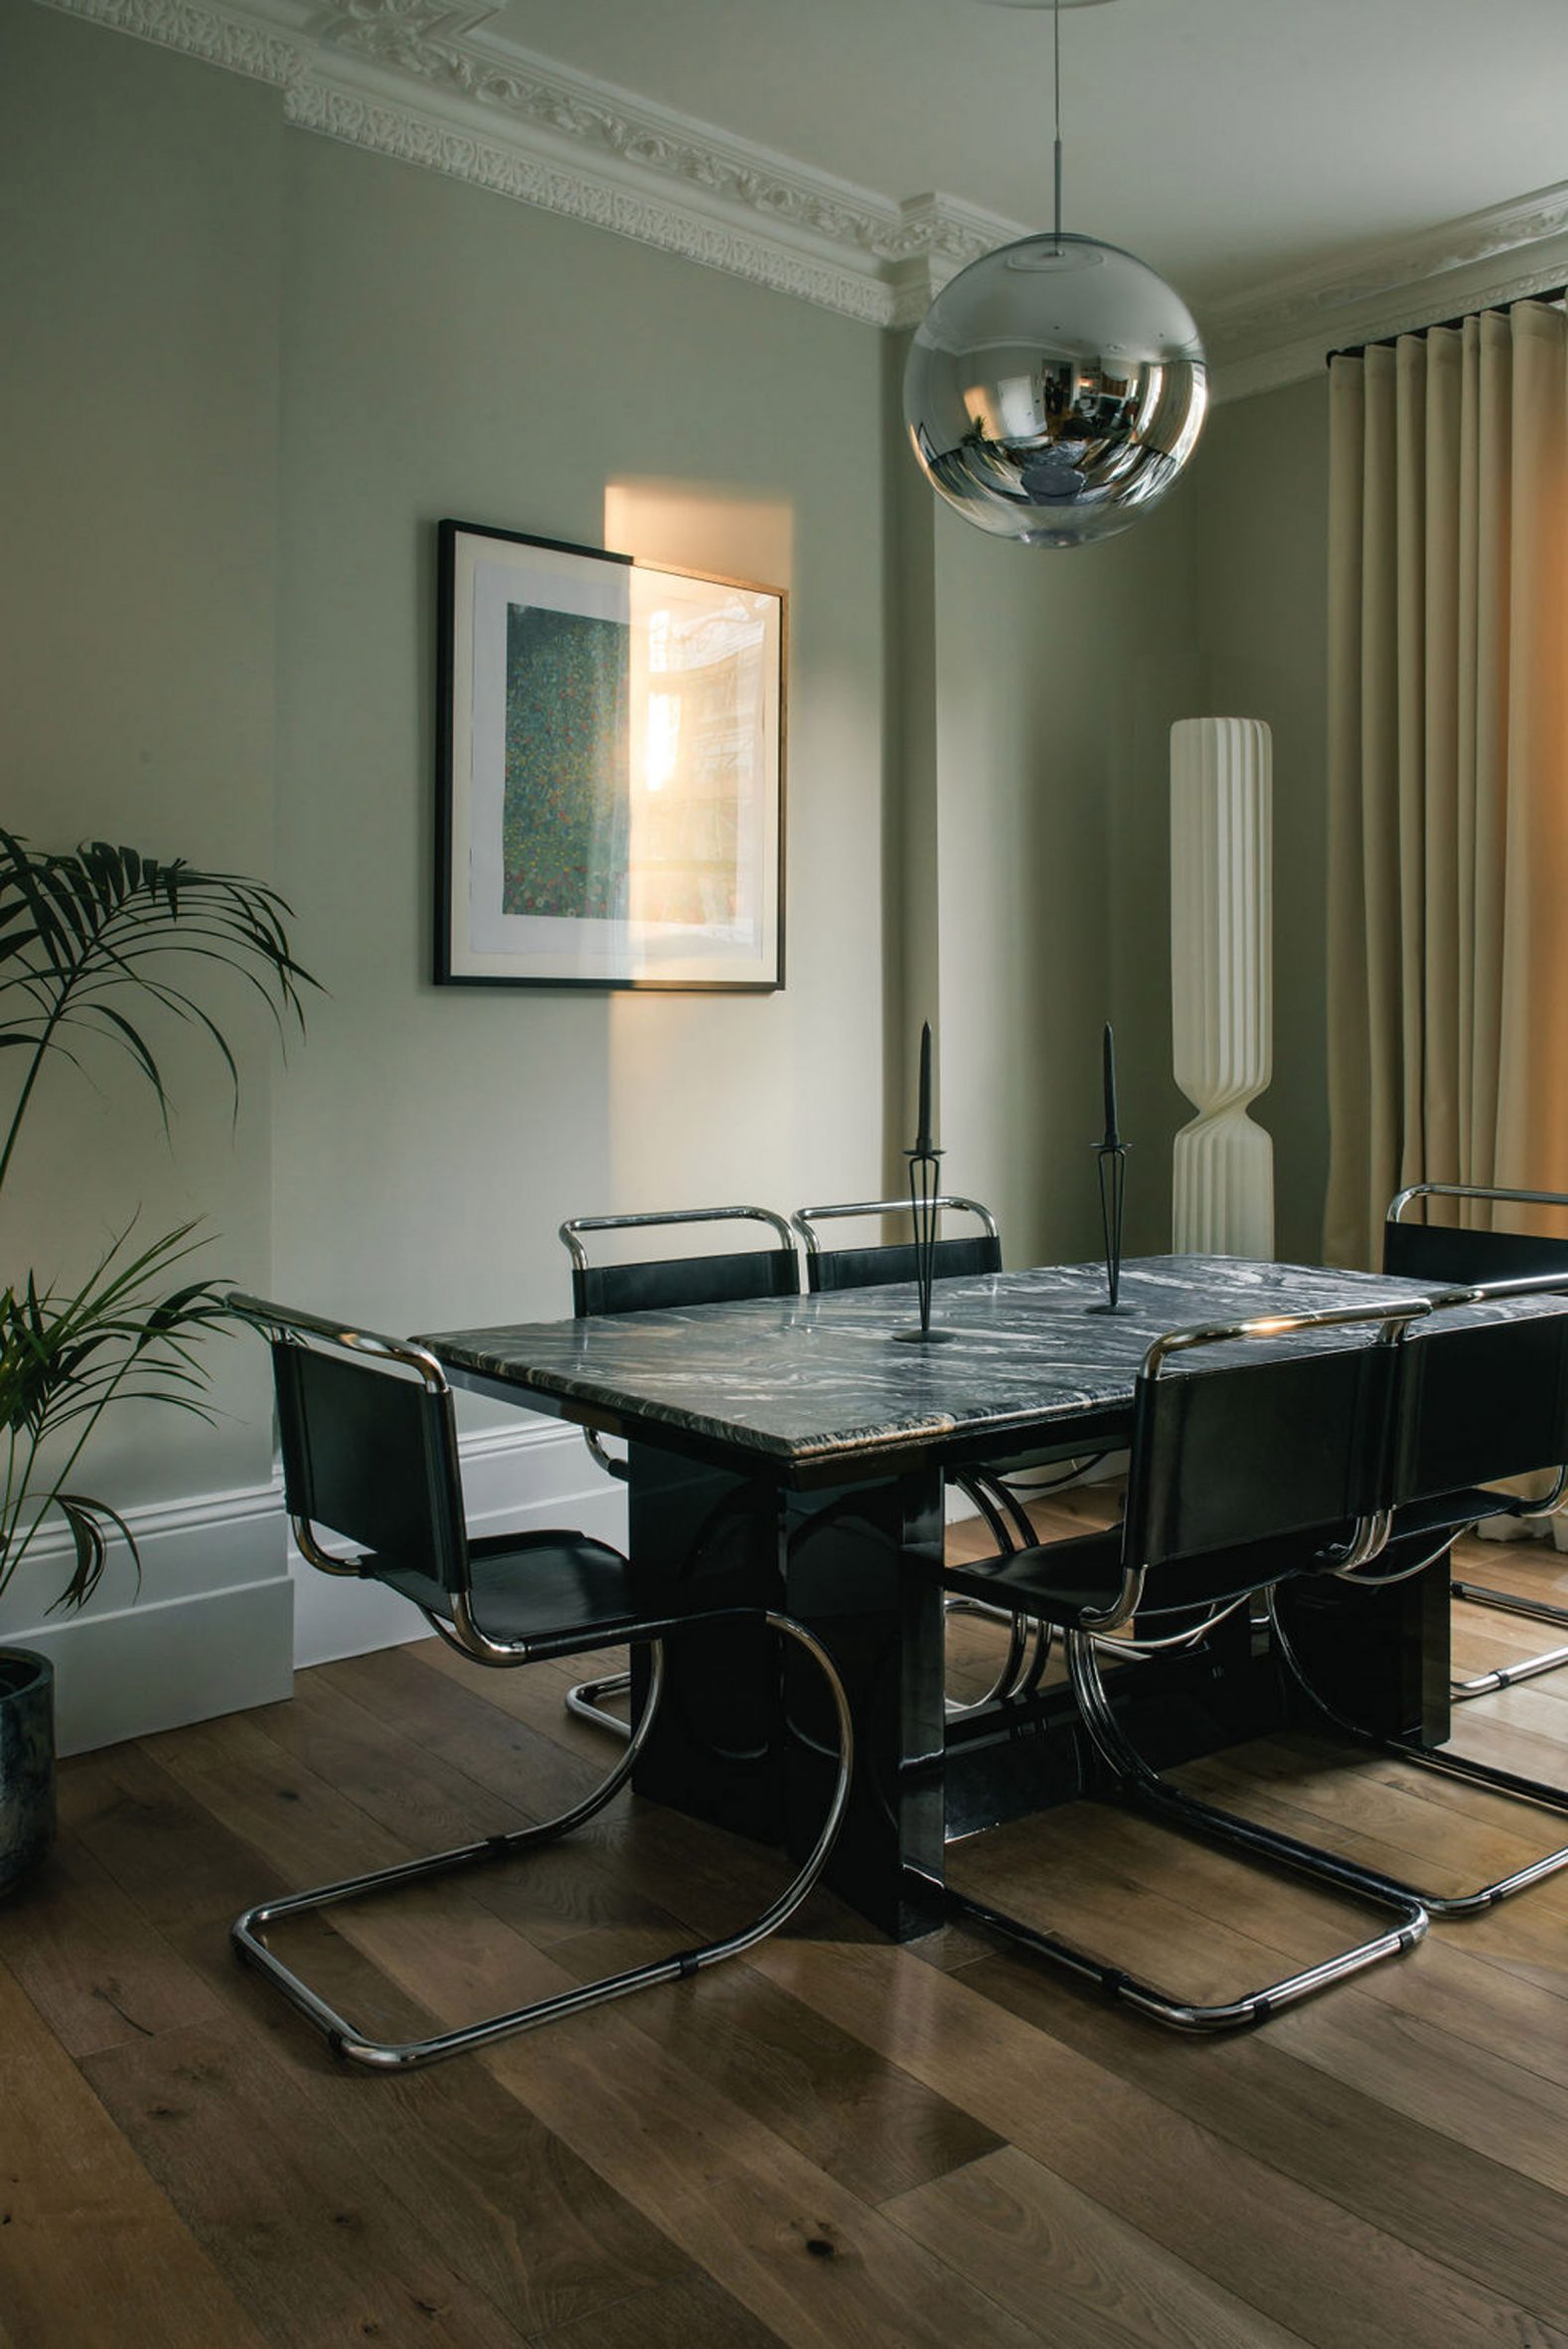 St Pauls Road townhouse dining area interior by Tabitha Isobel